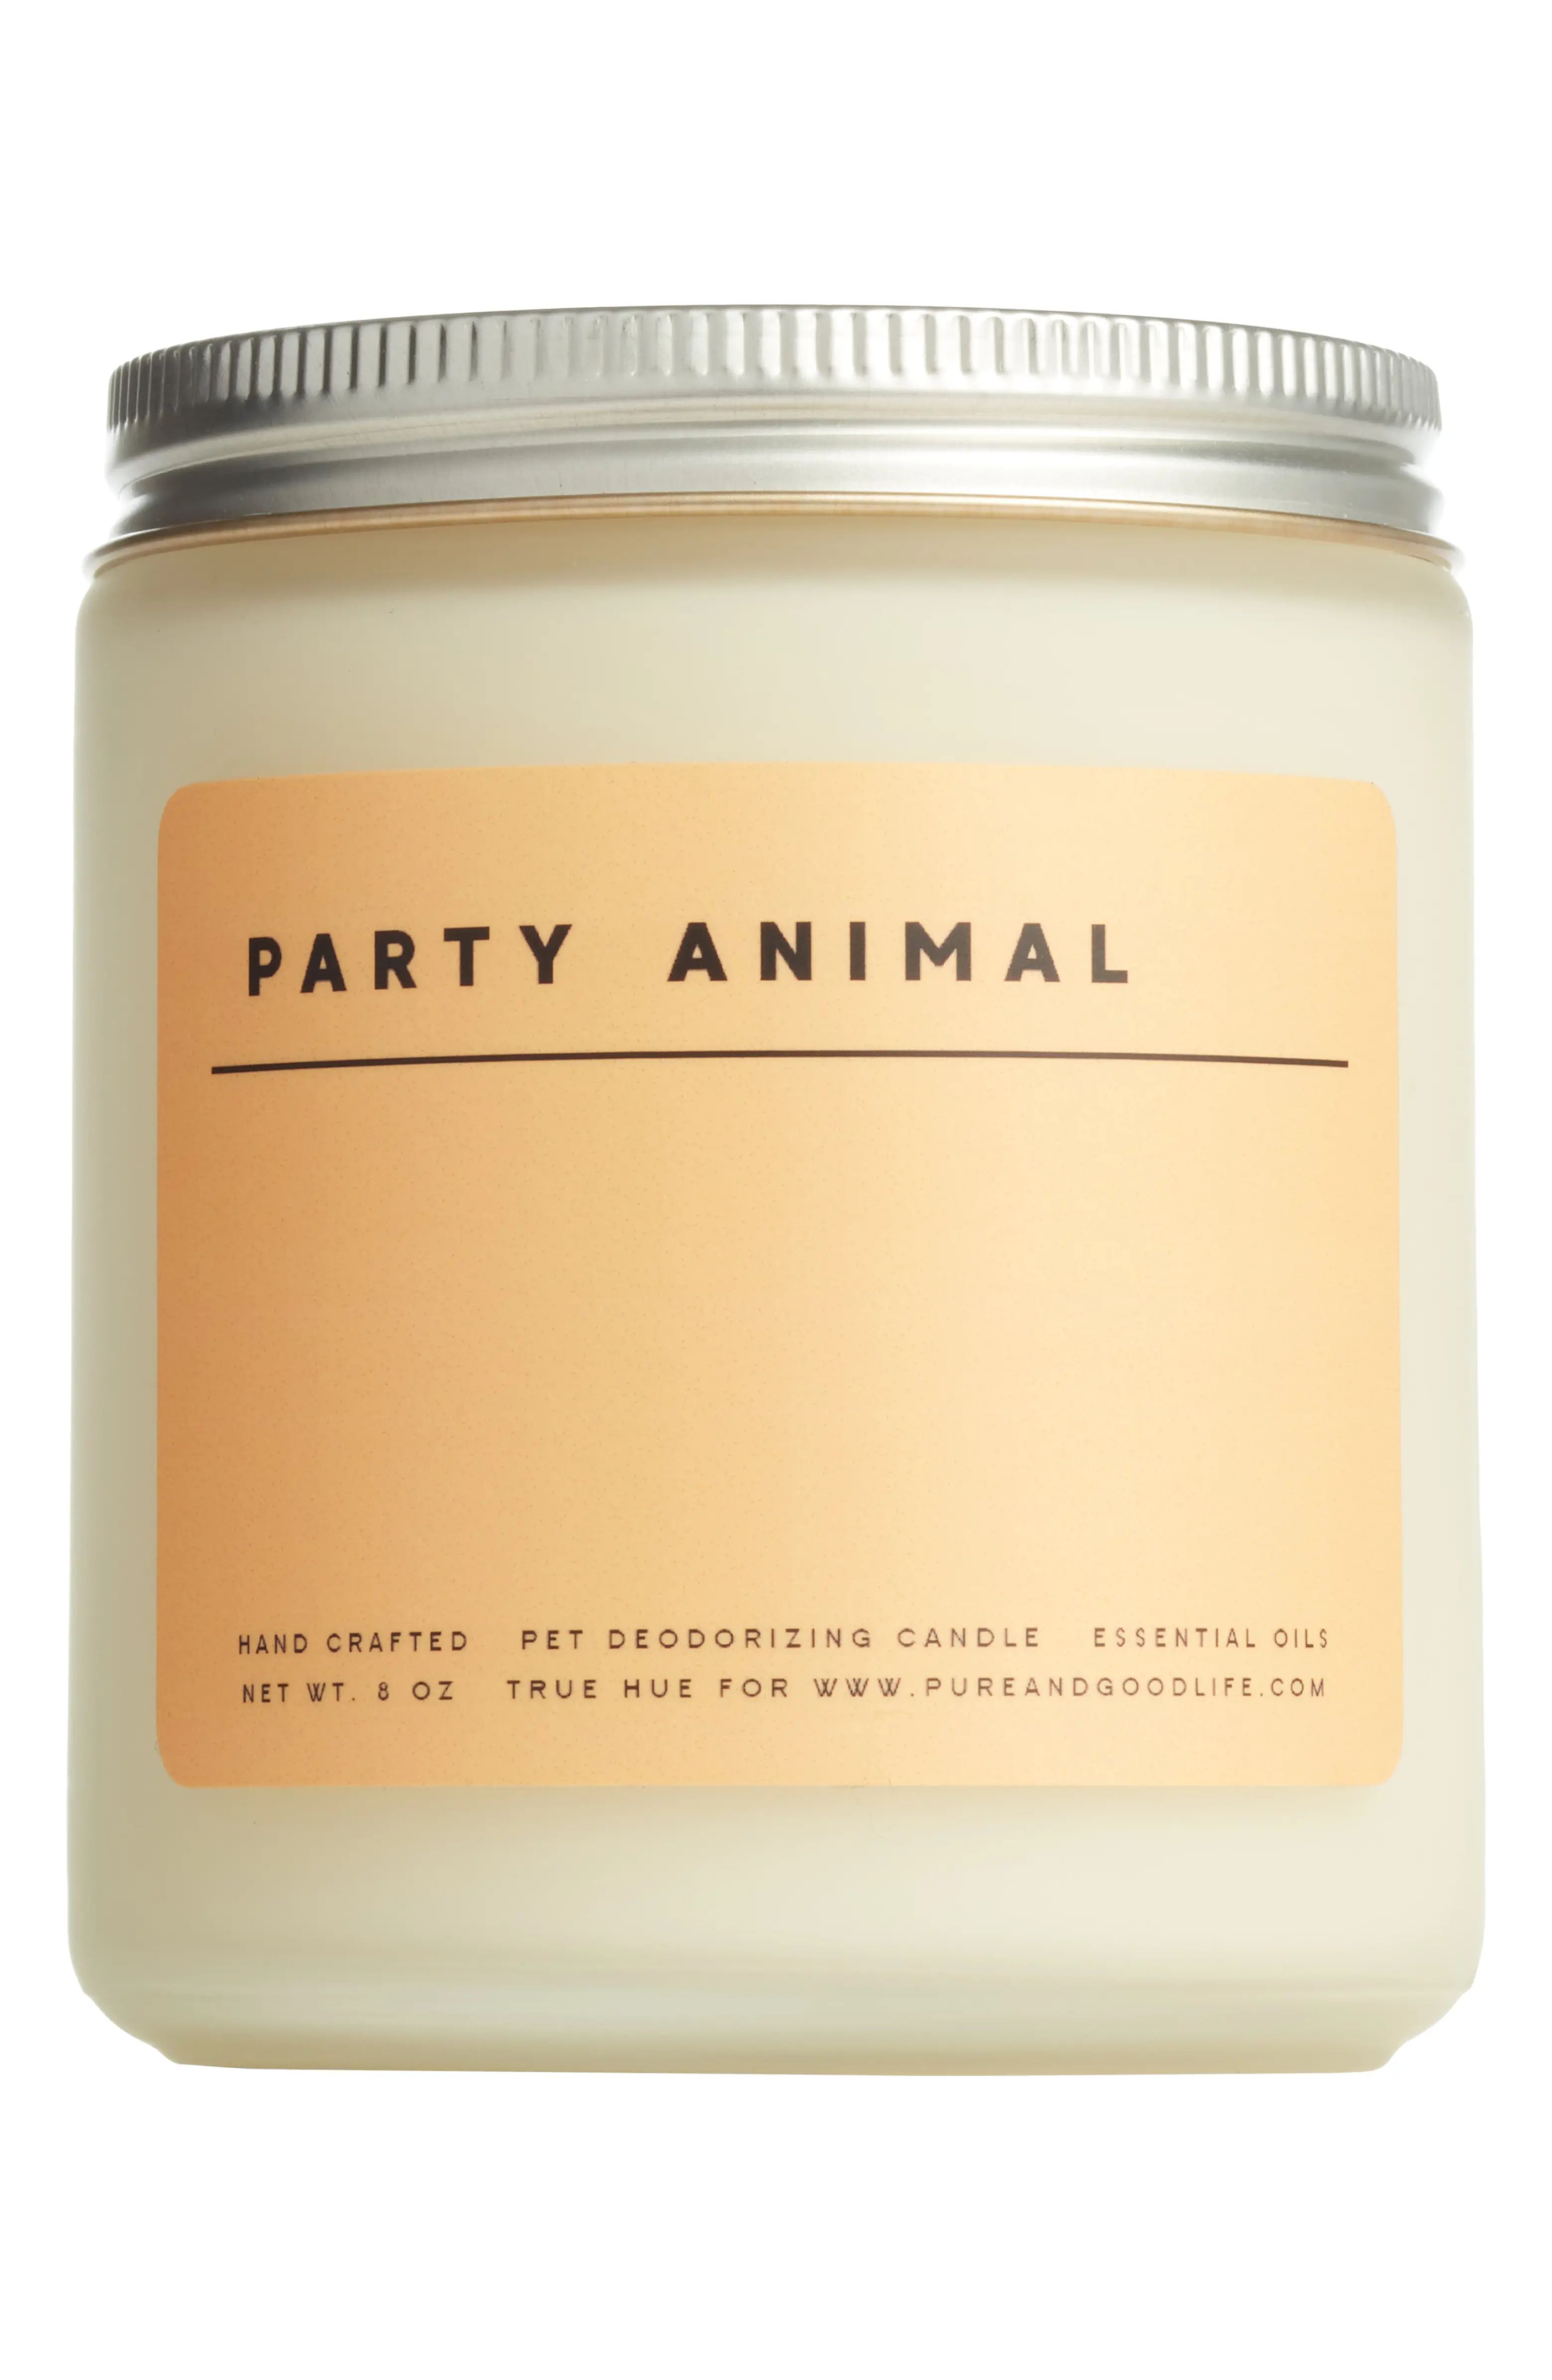 Party Animal Pet Deodorizing Soy Wax Candle | Nordstrom